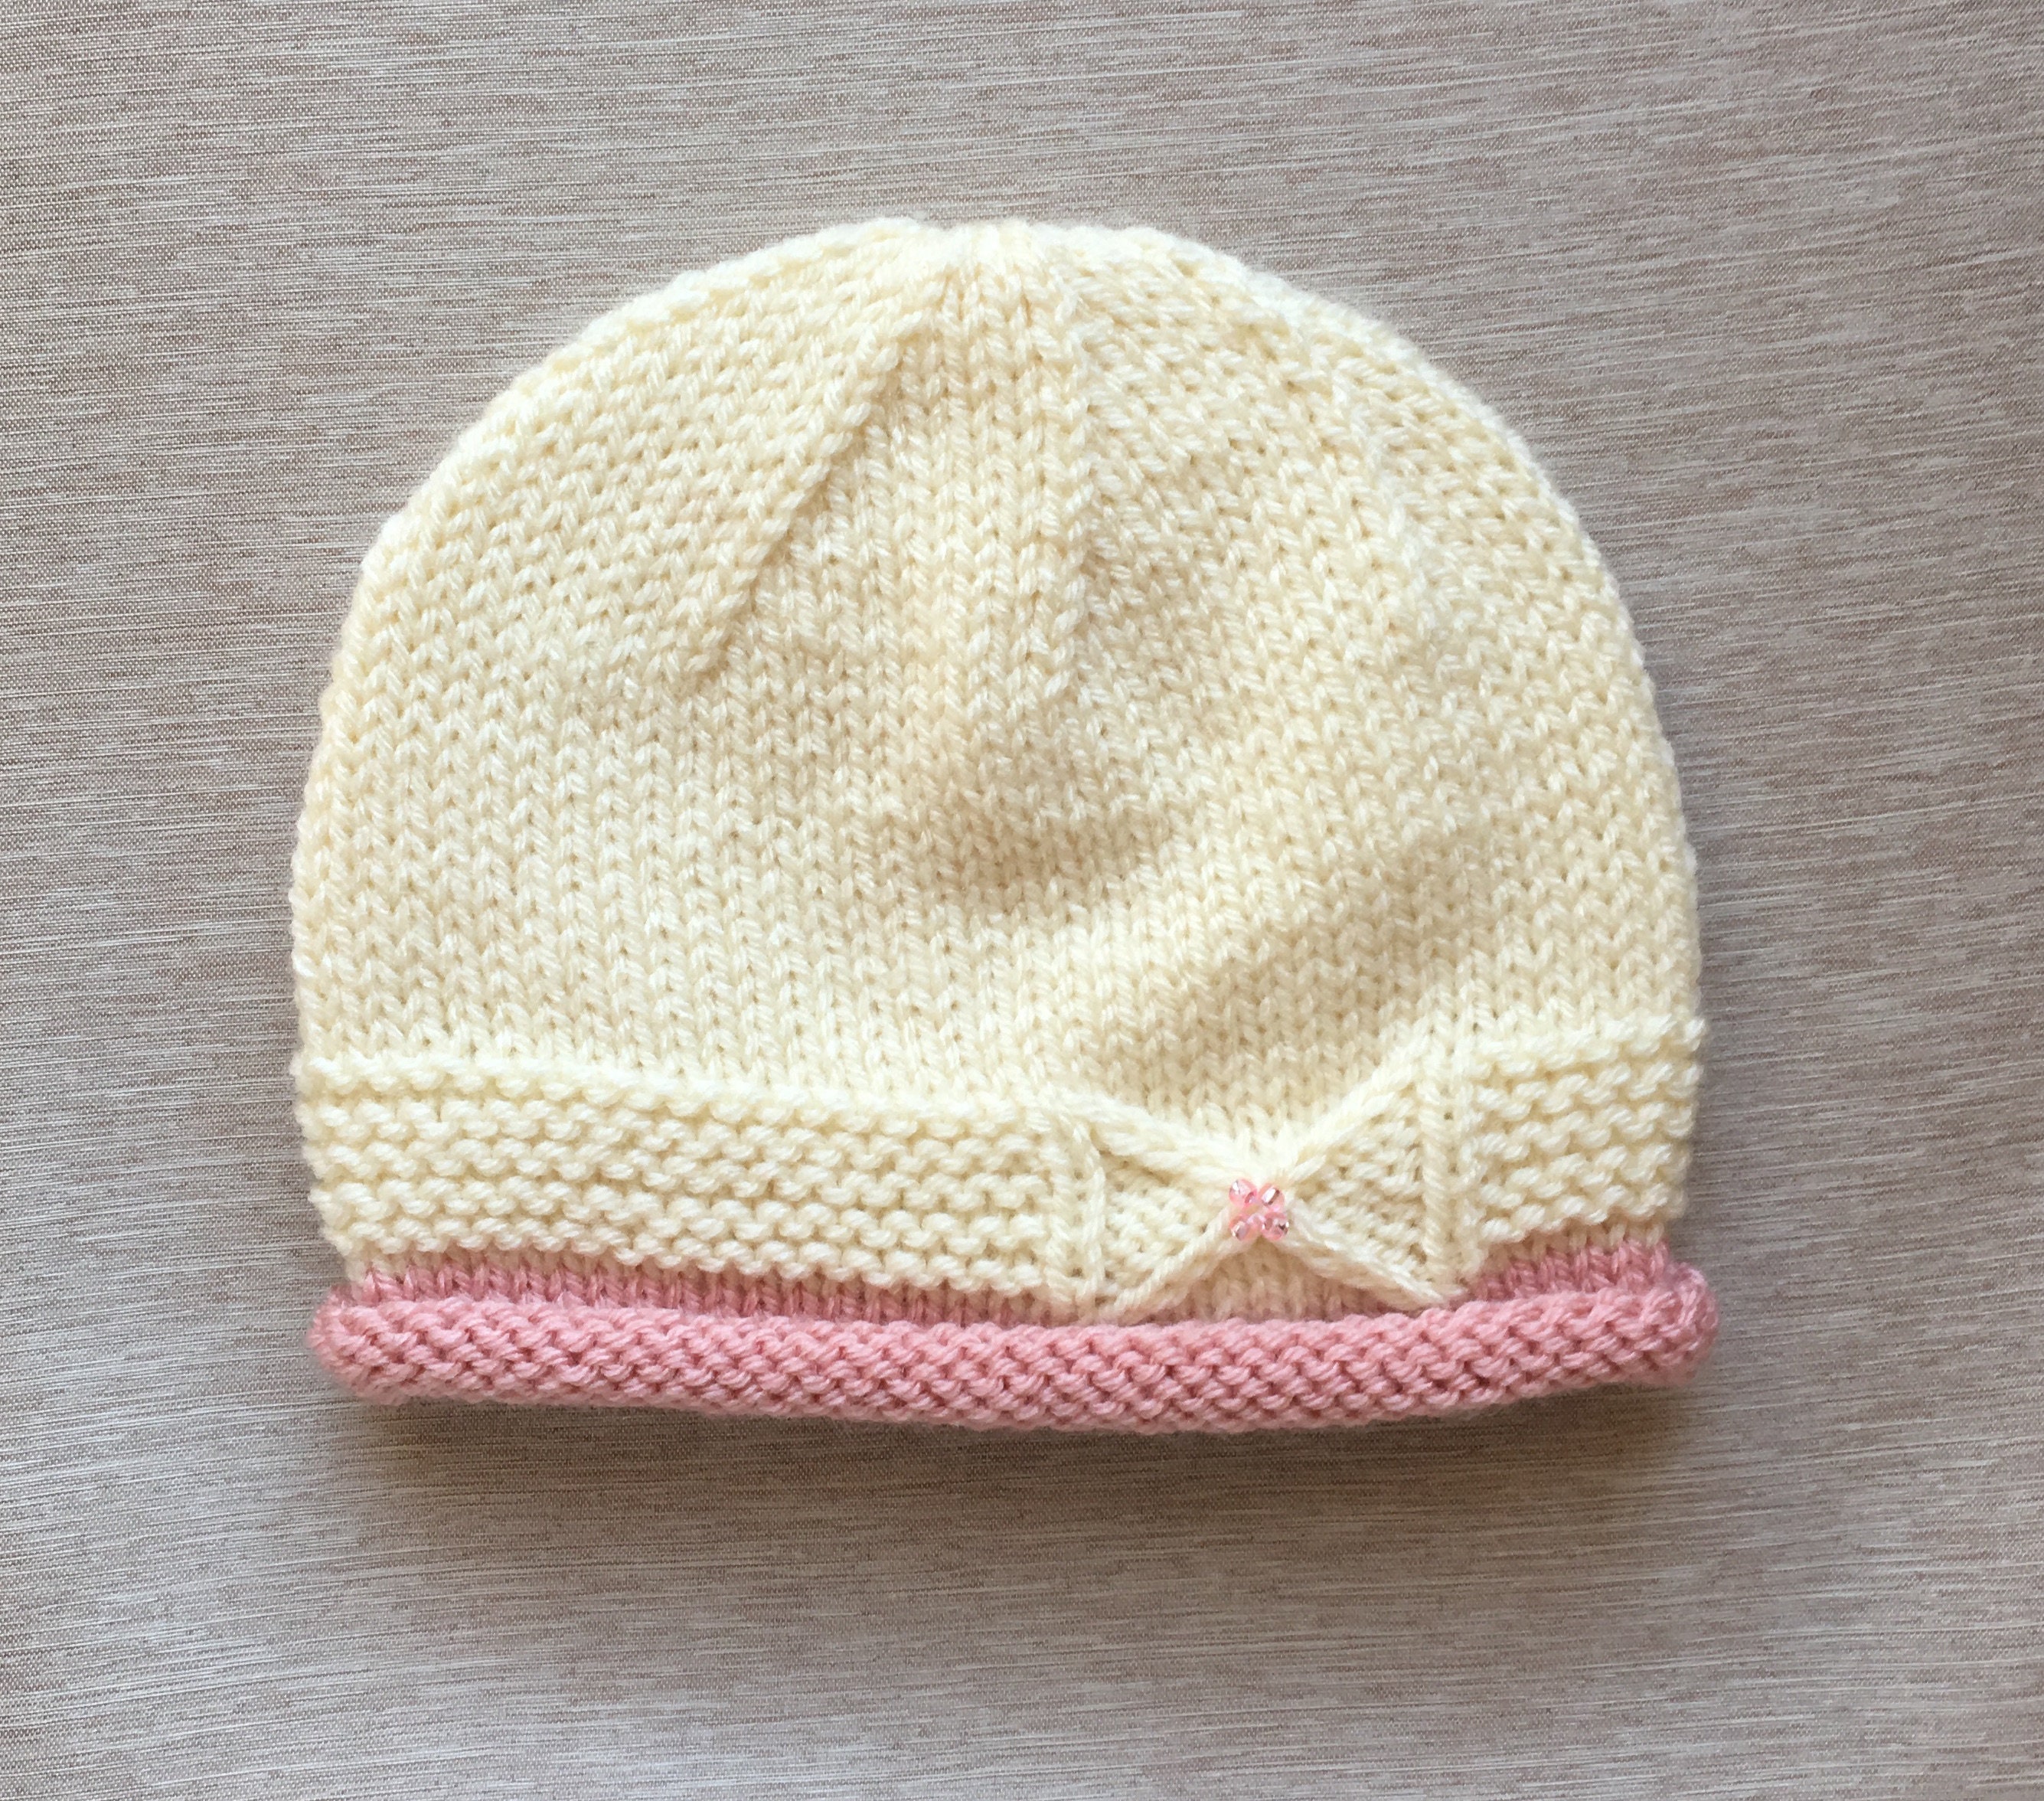 Knitting Pattern Instant Download Hat With a Small Bow Sizes - Etsy